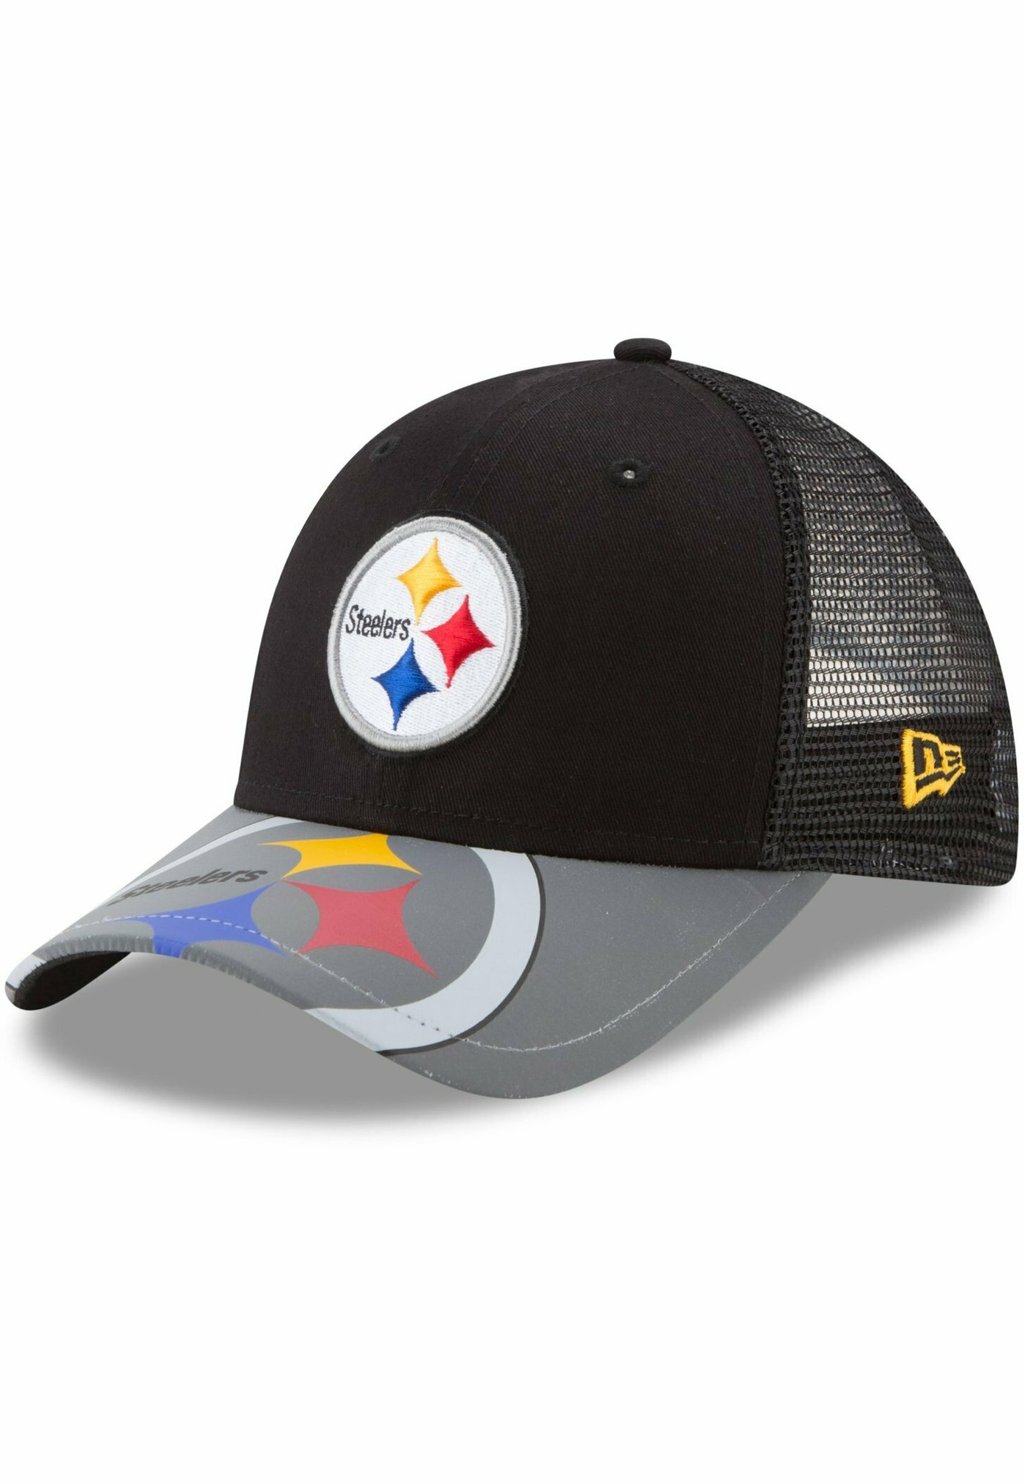 Бейсболка TRUCKER 9FORTY REFLECT VISOR NFL TEAMS New Era, цвет pittsburgh steelers new 2021 steelers men s fans rugby jerseys sports fans bush american wear devin football pittsburgh jersey stitched t shirts